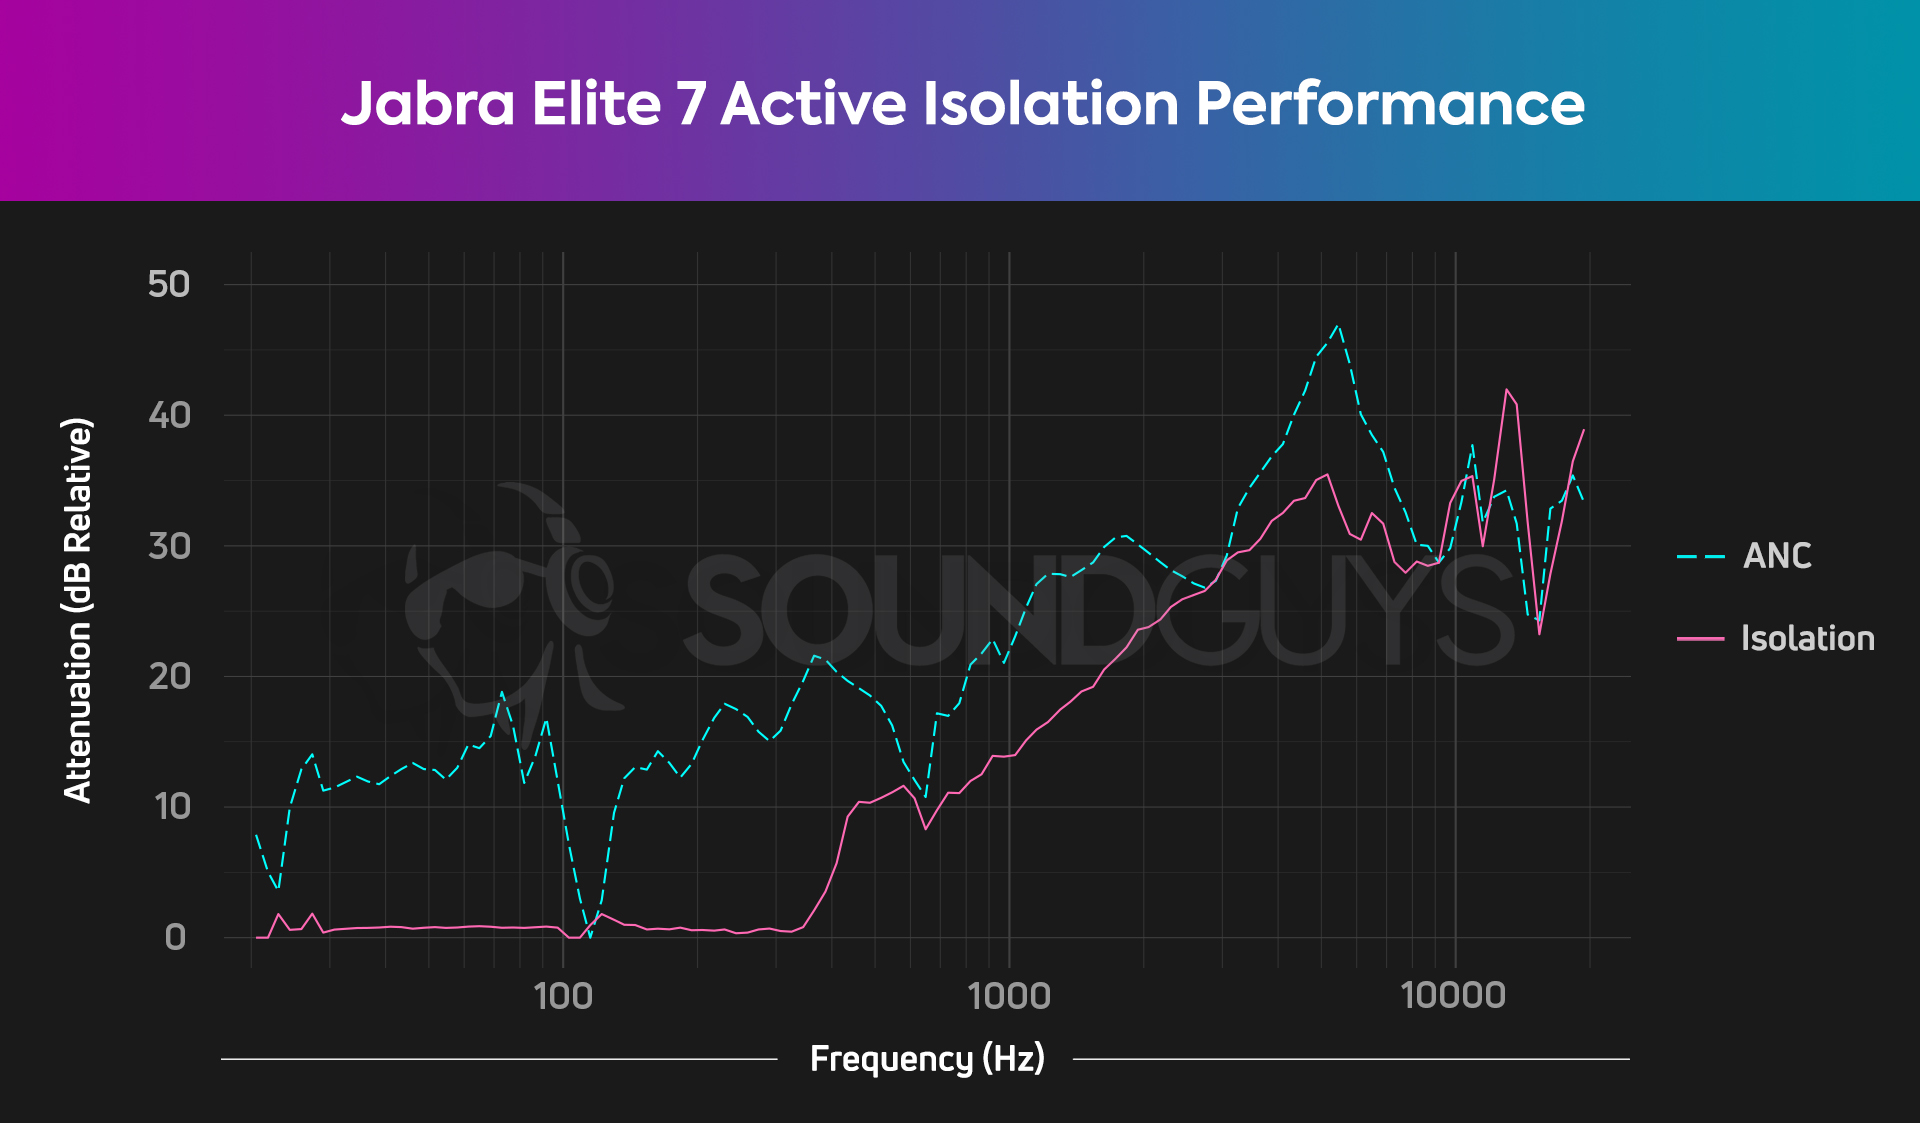 A chart showing the isolation and ANC performance of the Jabra Elite 7 Active with at least 20dB of attenuation throughout most of the audible frequency spectrum.